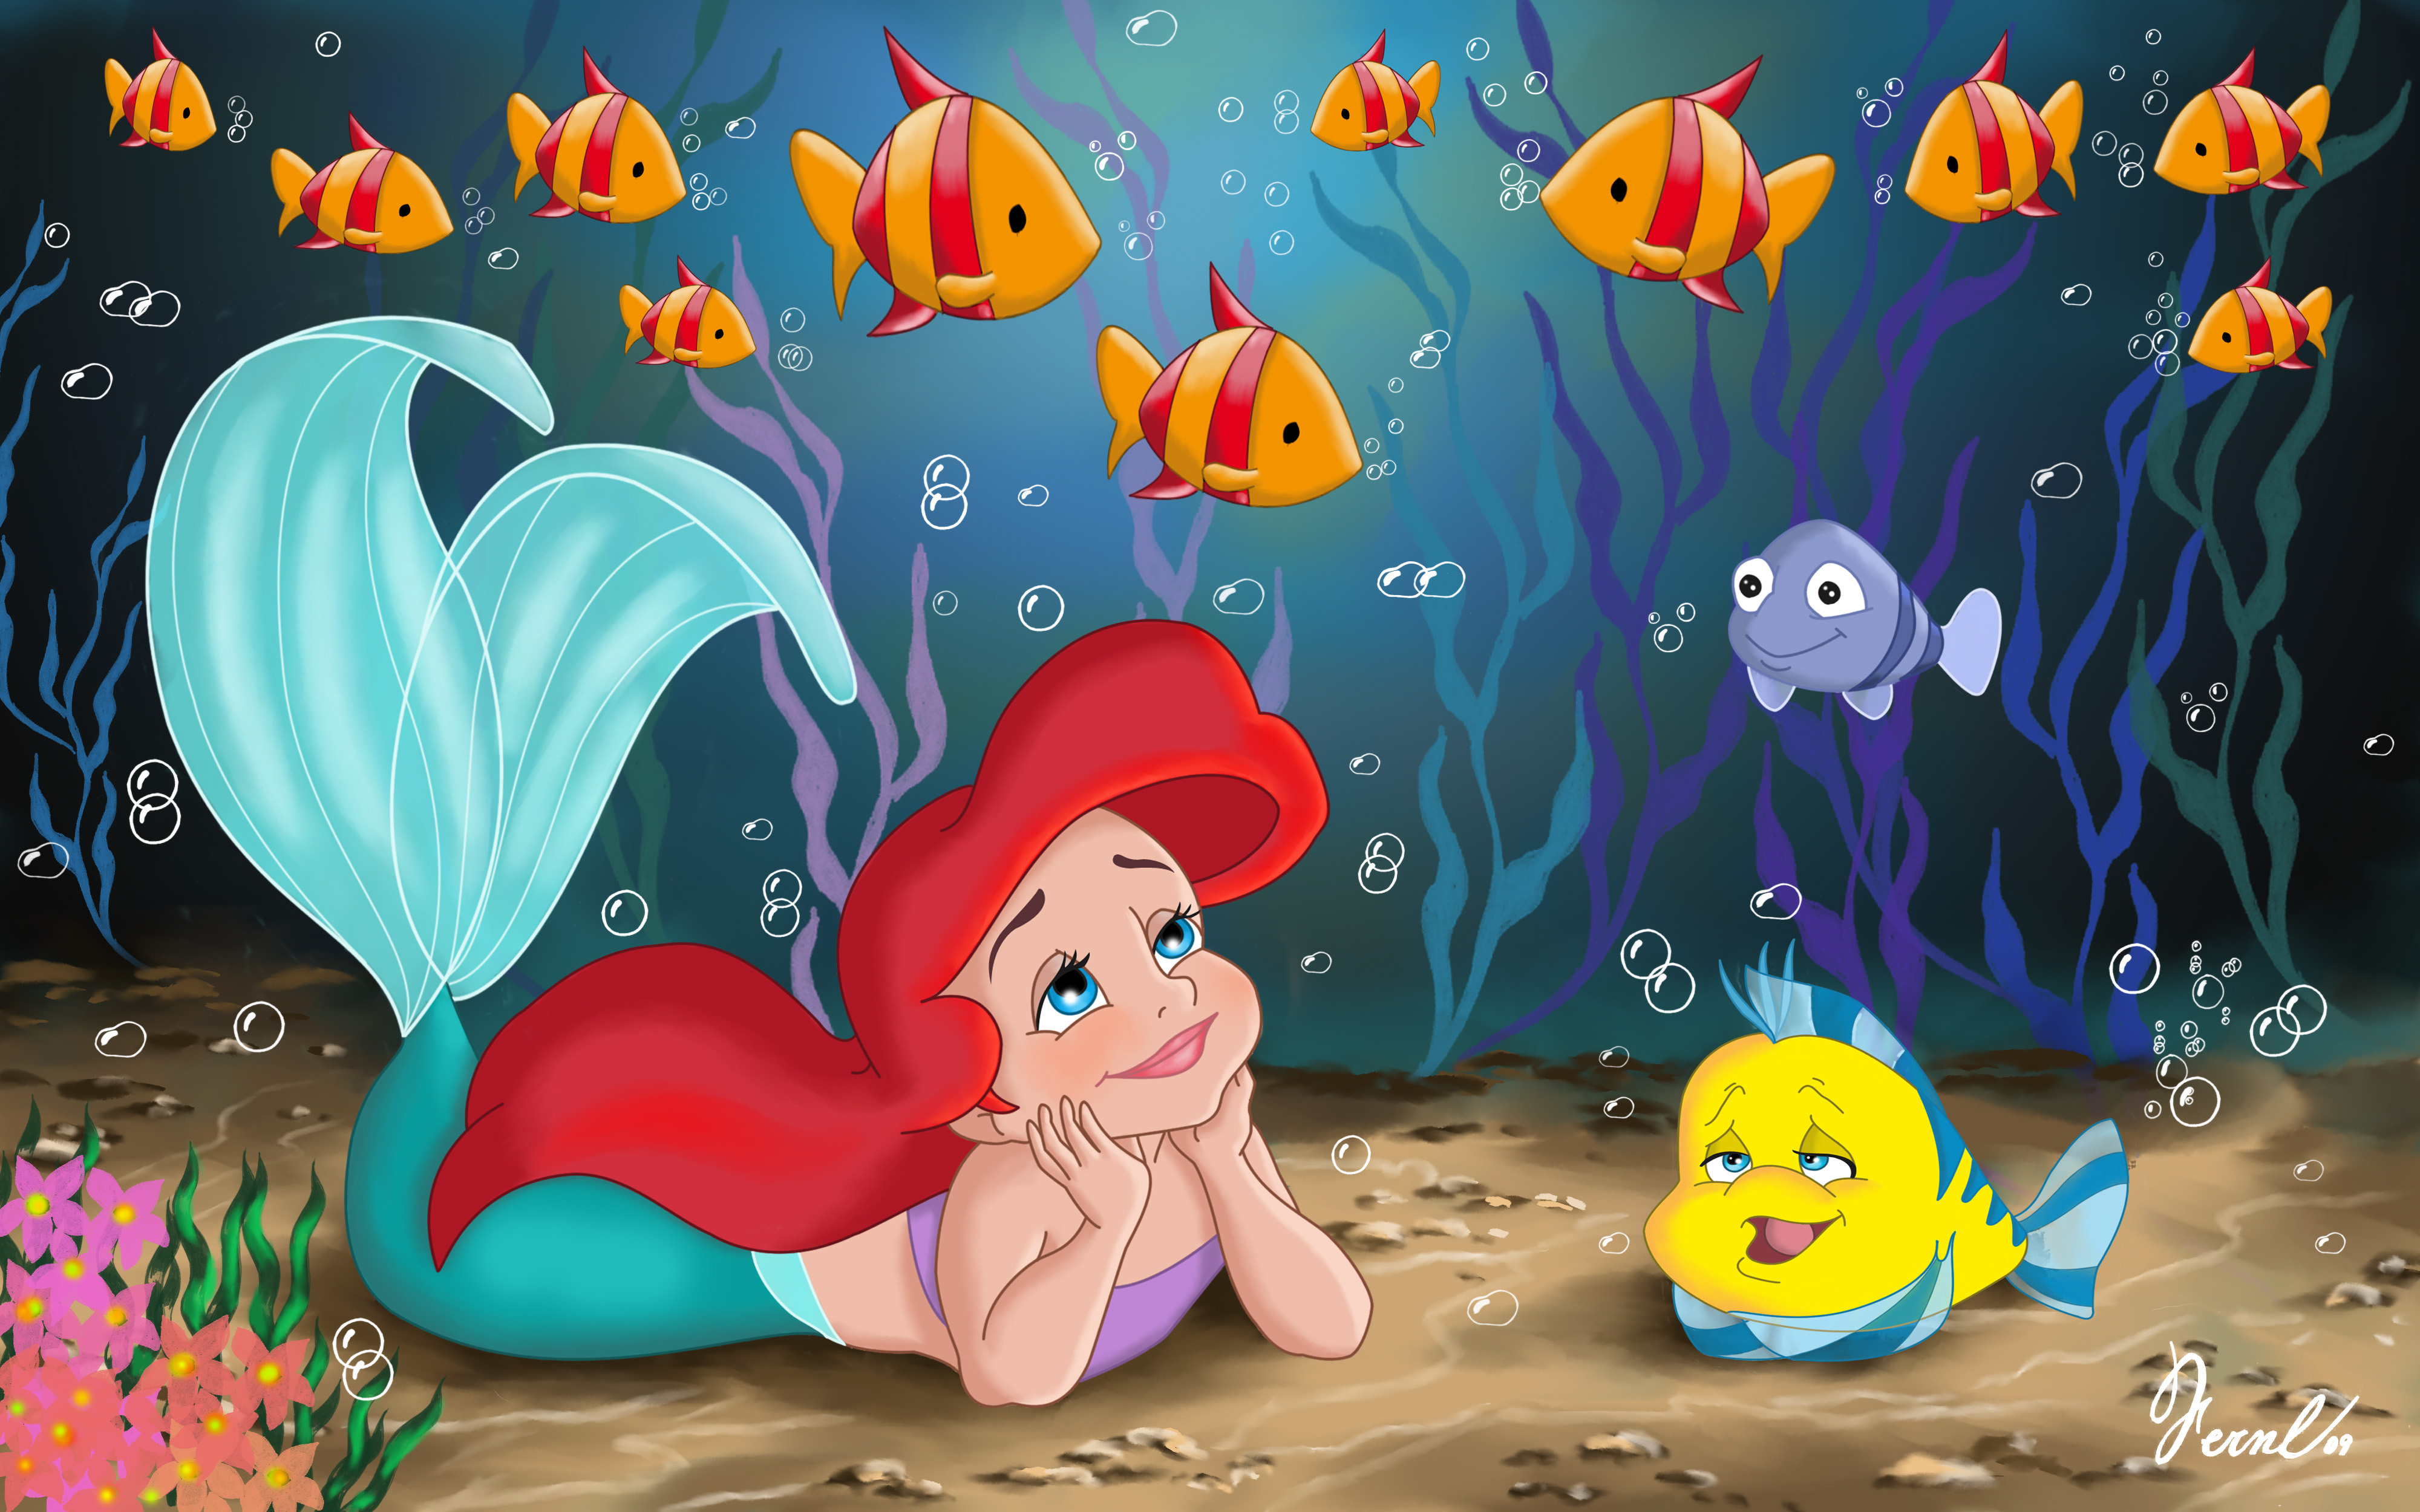 50 The Little Mermaid HD Wallpapers | Backgrounds - Wallpaper Abyss